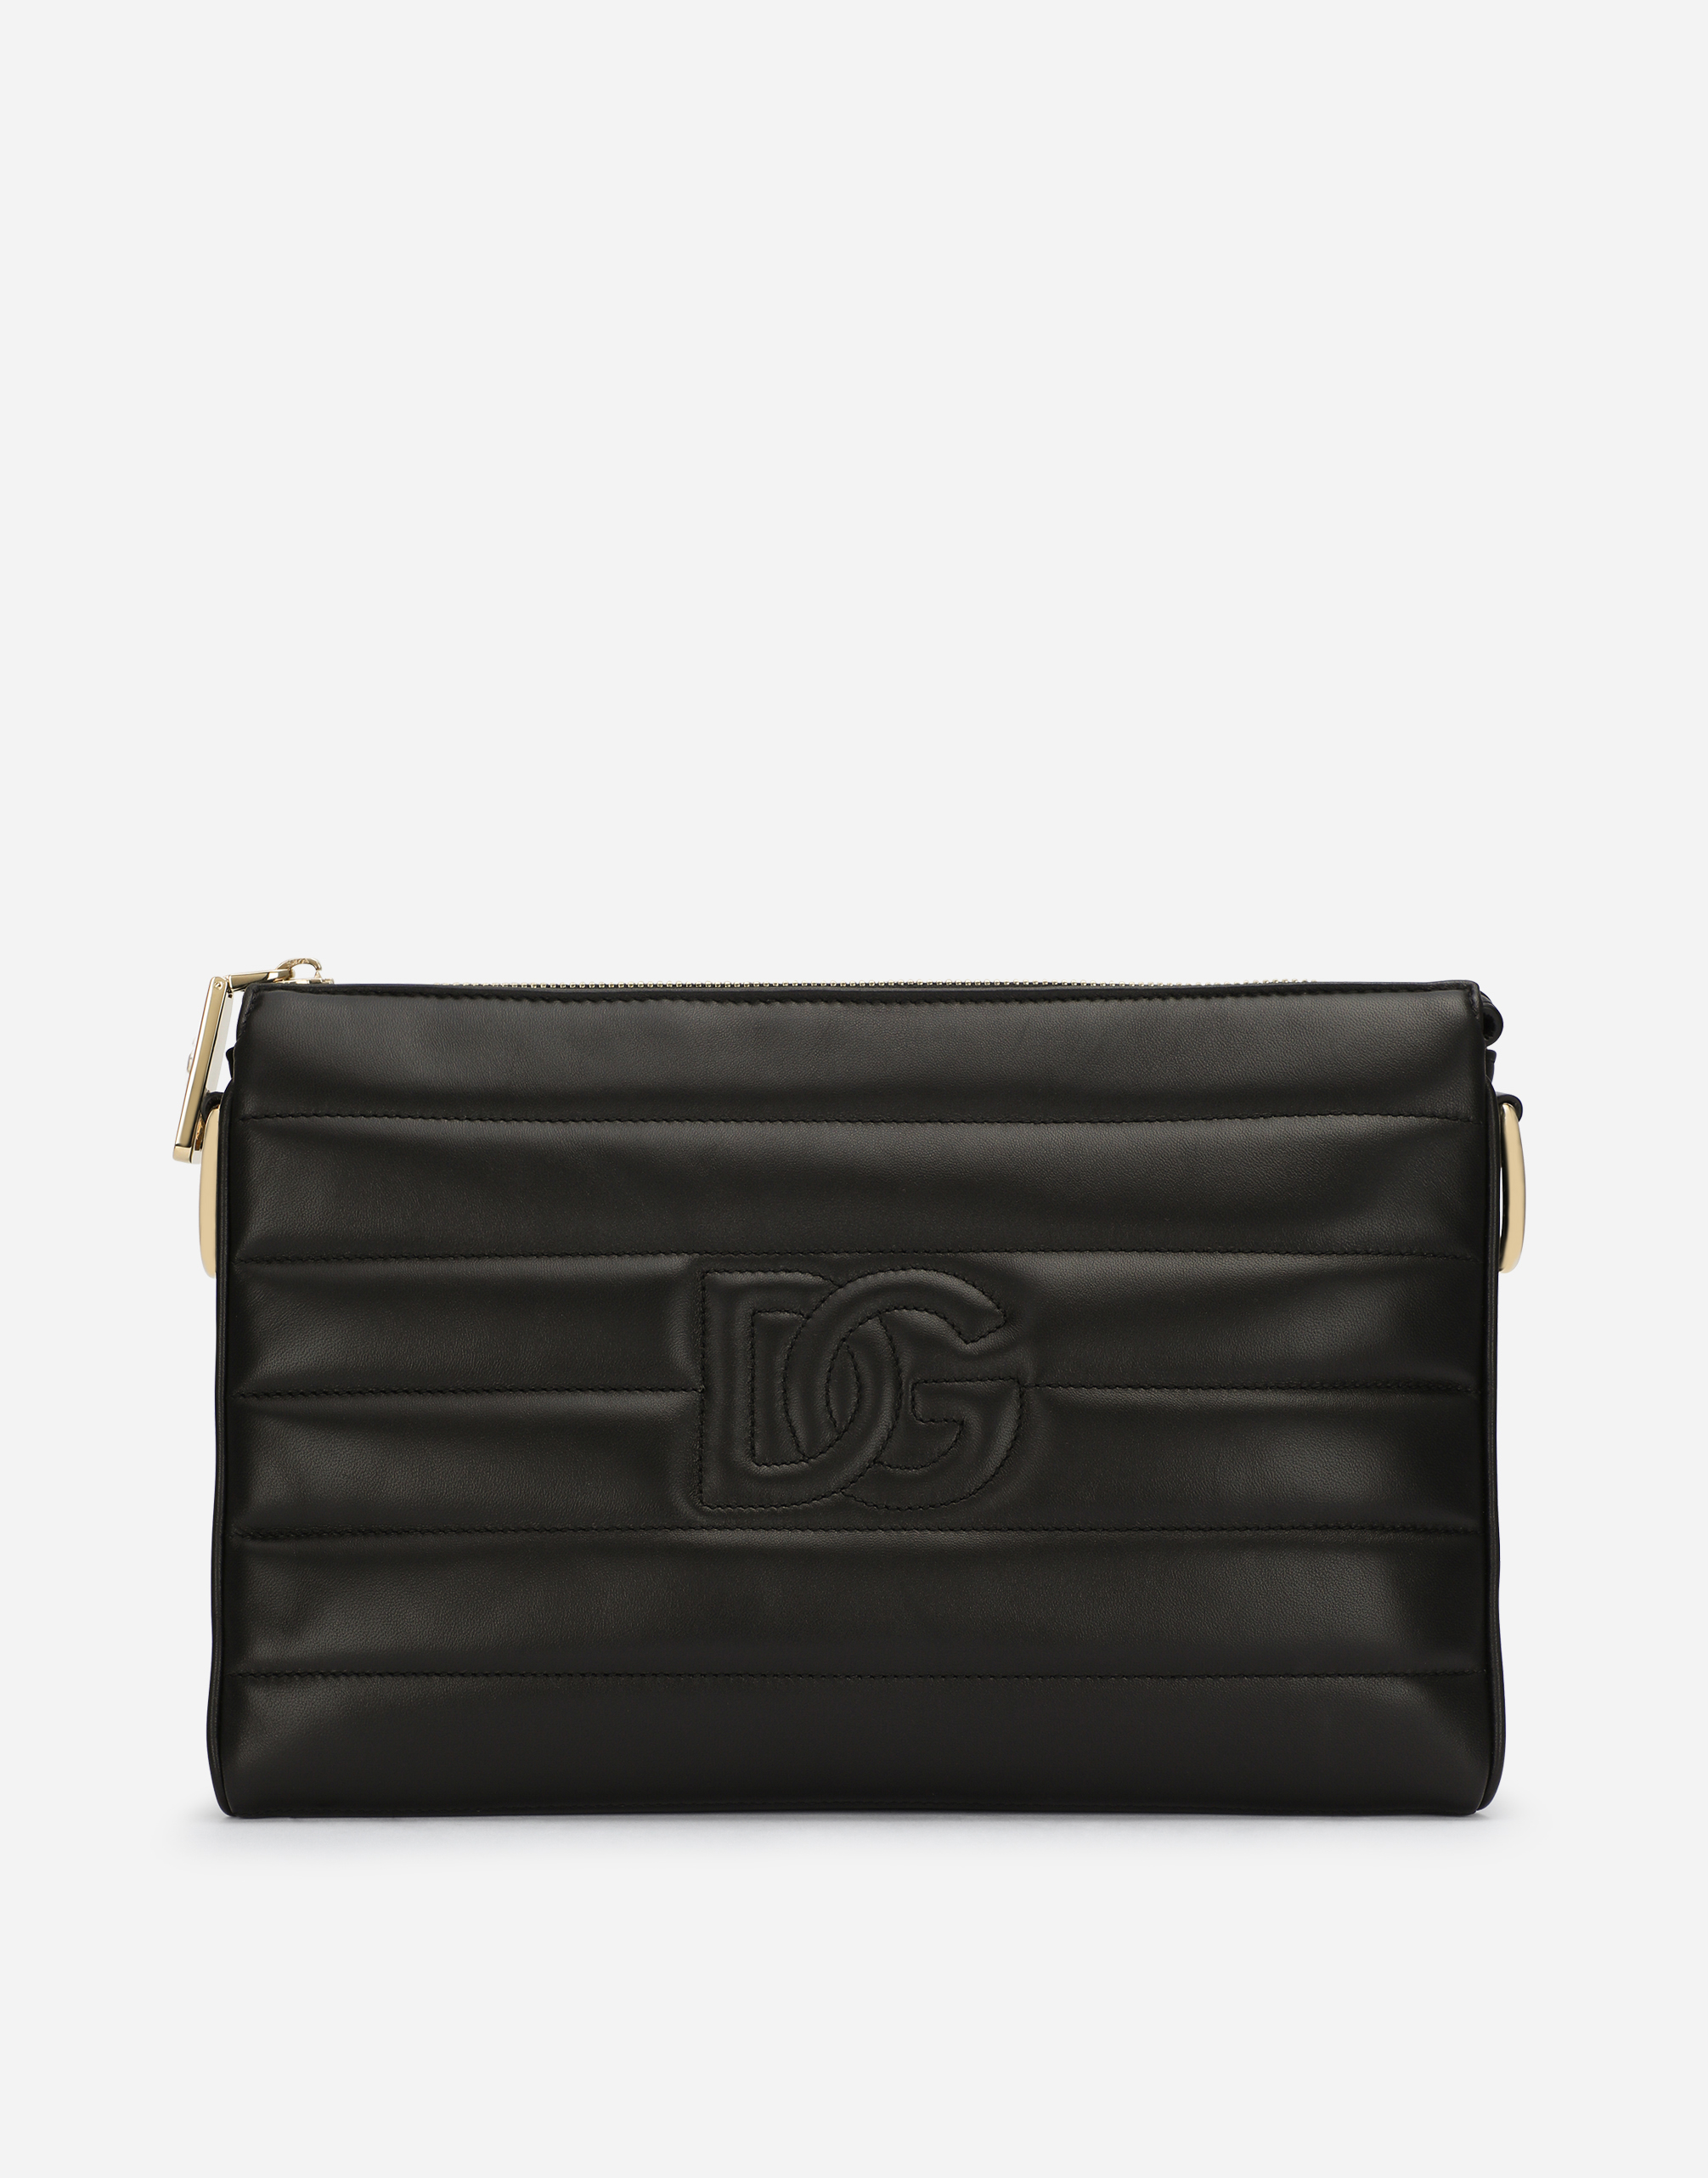 Medium Tris bag in quilted nappa leather in Black